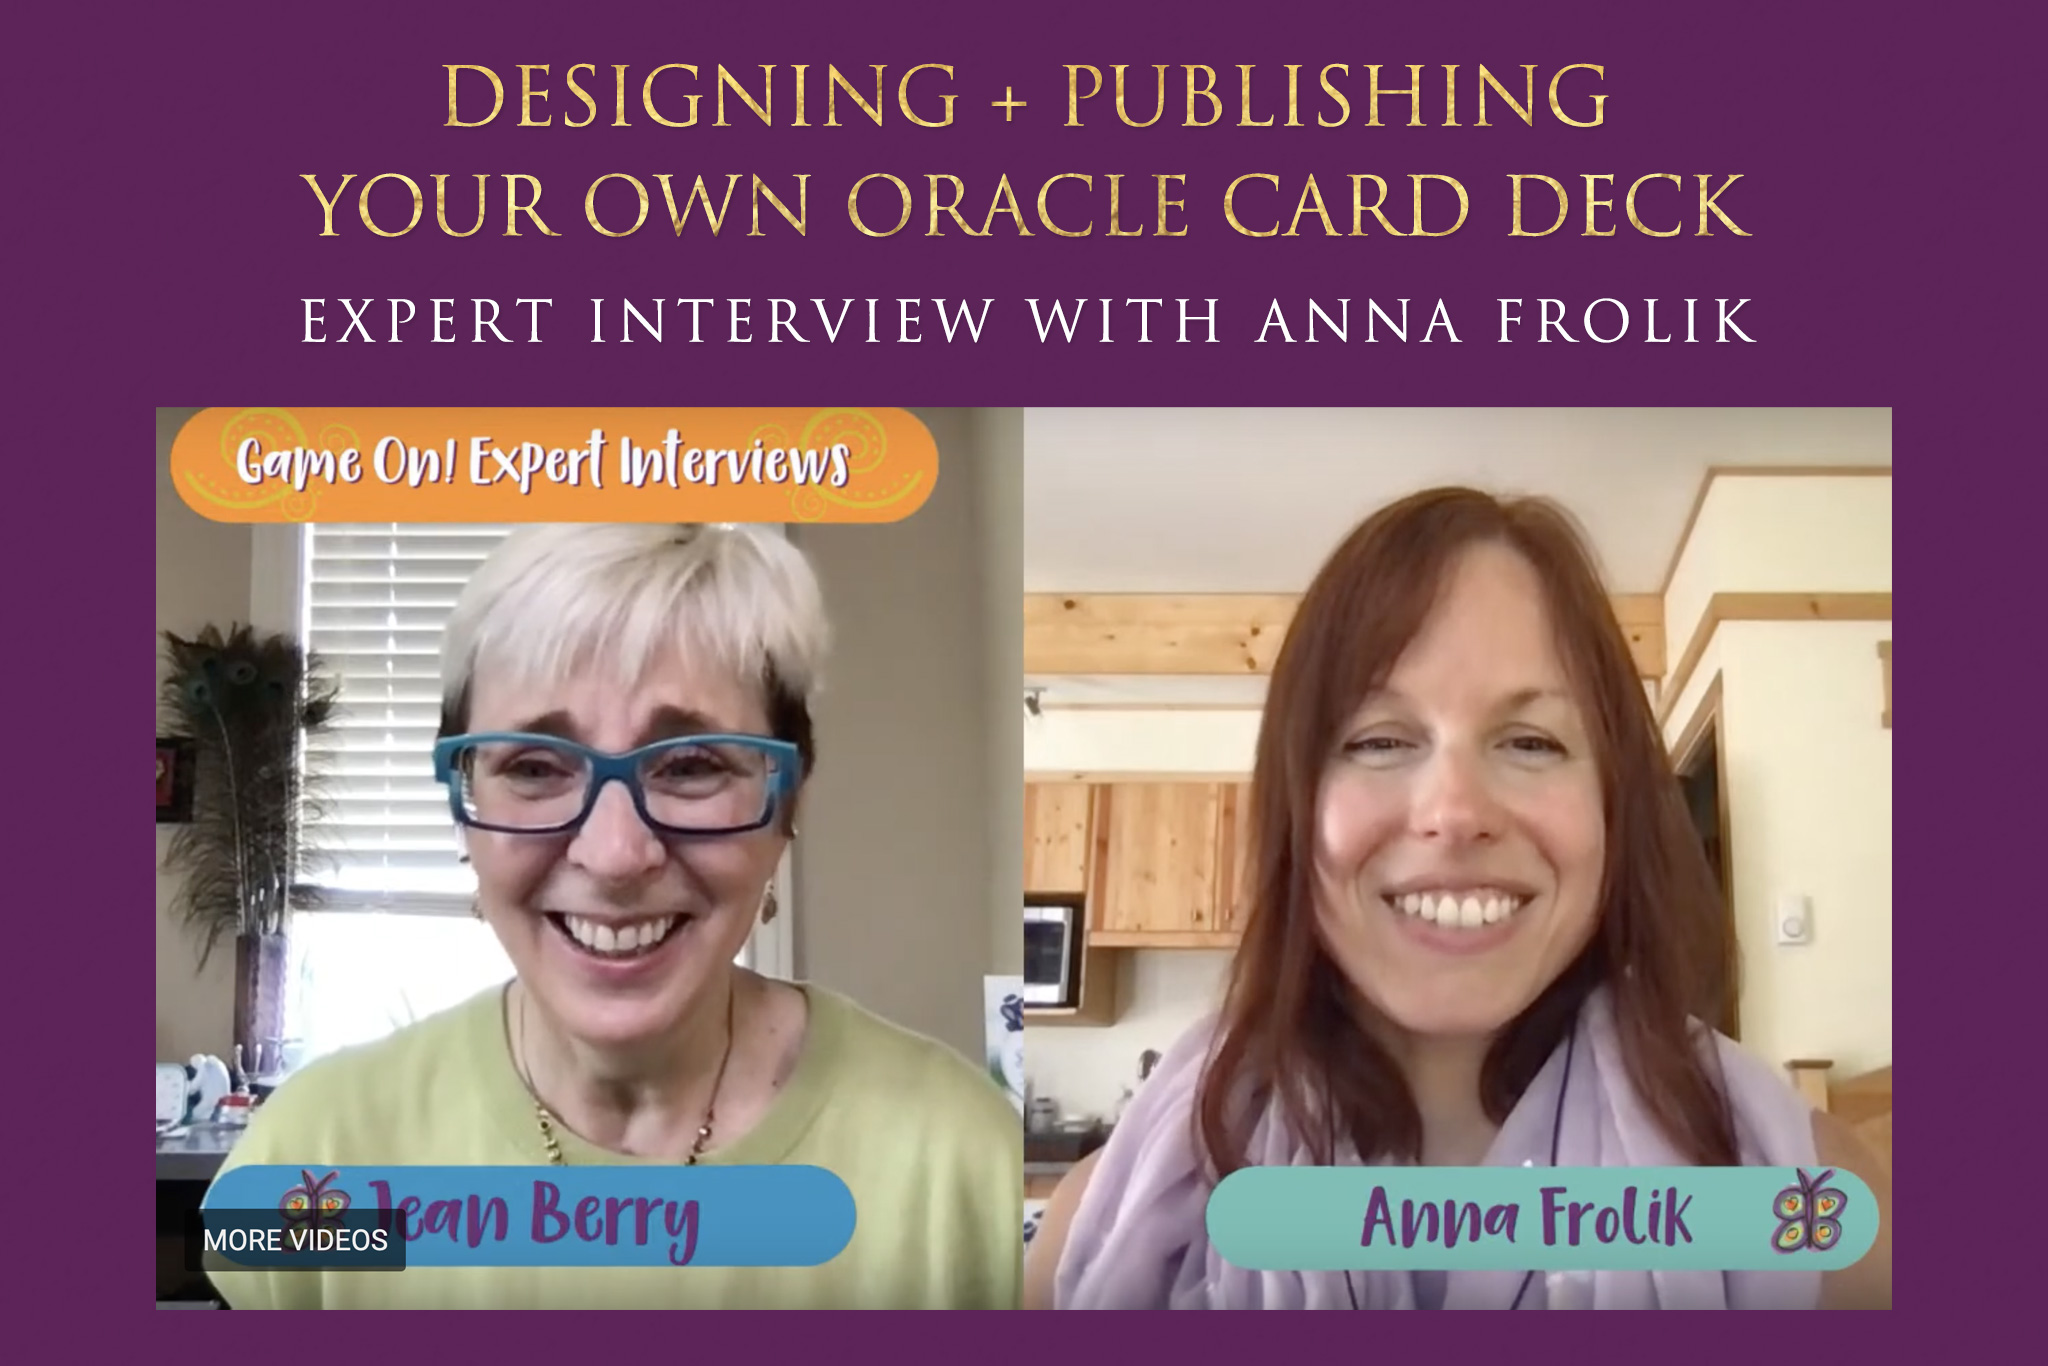 Designing + Publishing Your Own Oracle Card Deck (Expert Interview with Anna Frolik + Jean Berry)